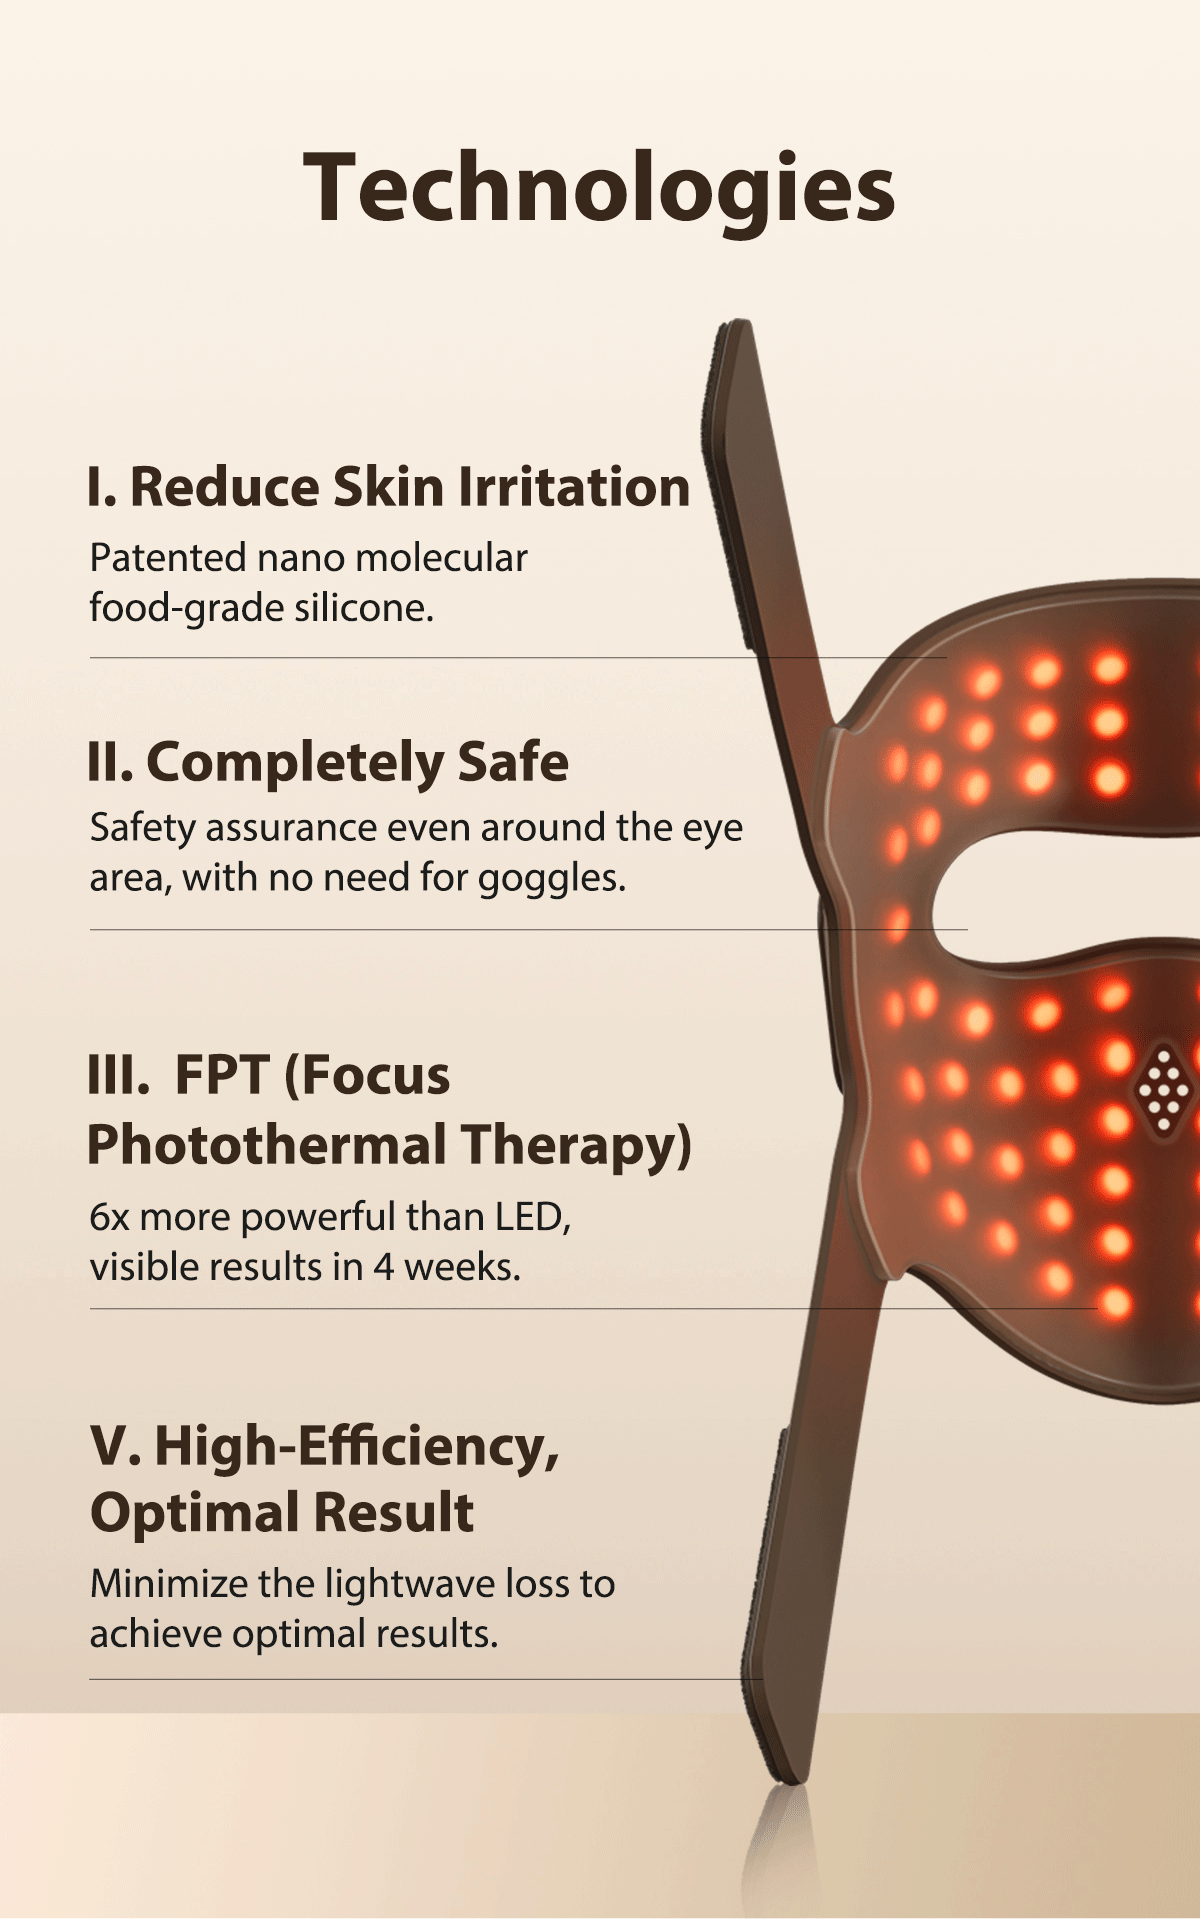 JOVS 4D Laser Light Therapy Mask showcasing FPT technology for enhanced safety and efficiency, reducing skin irritation and providing optimal results without goggles.